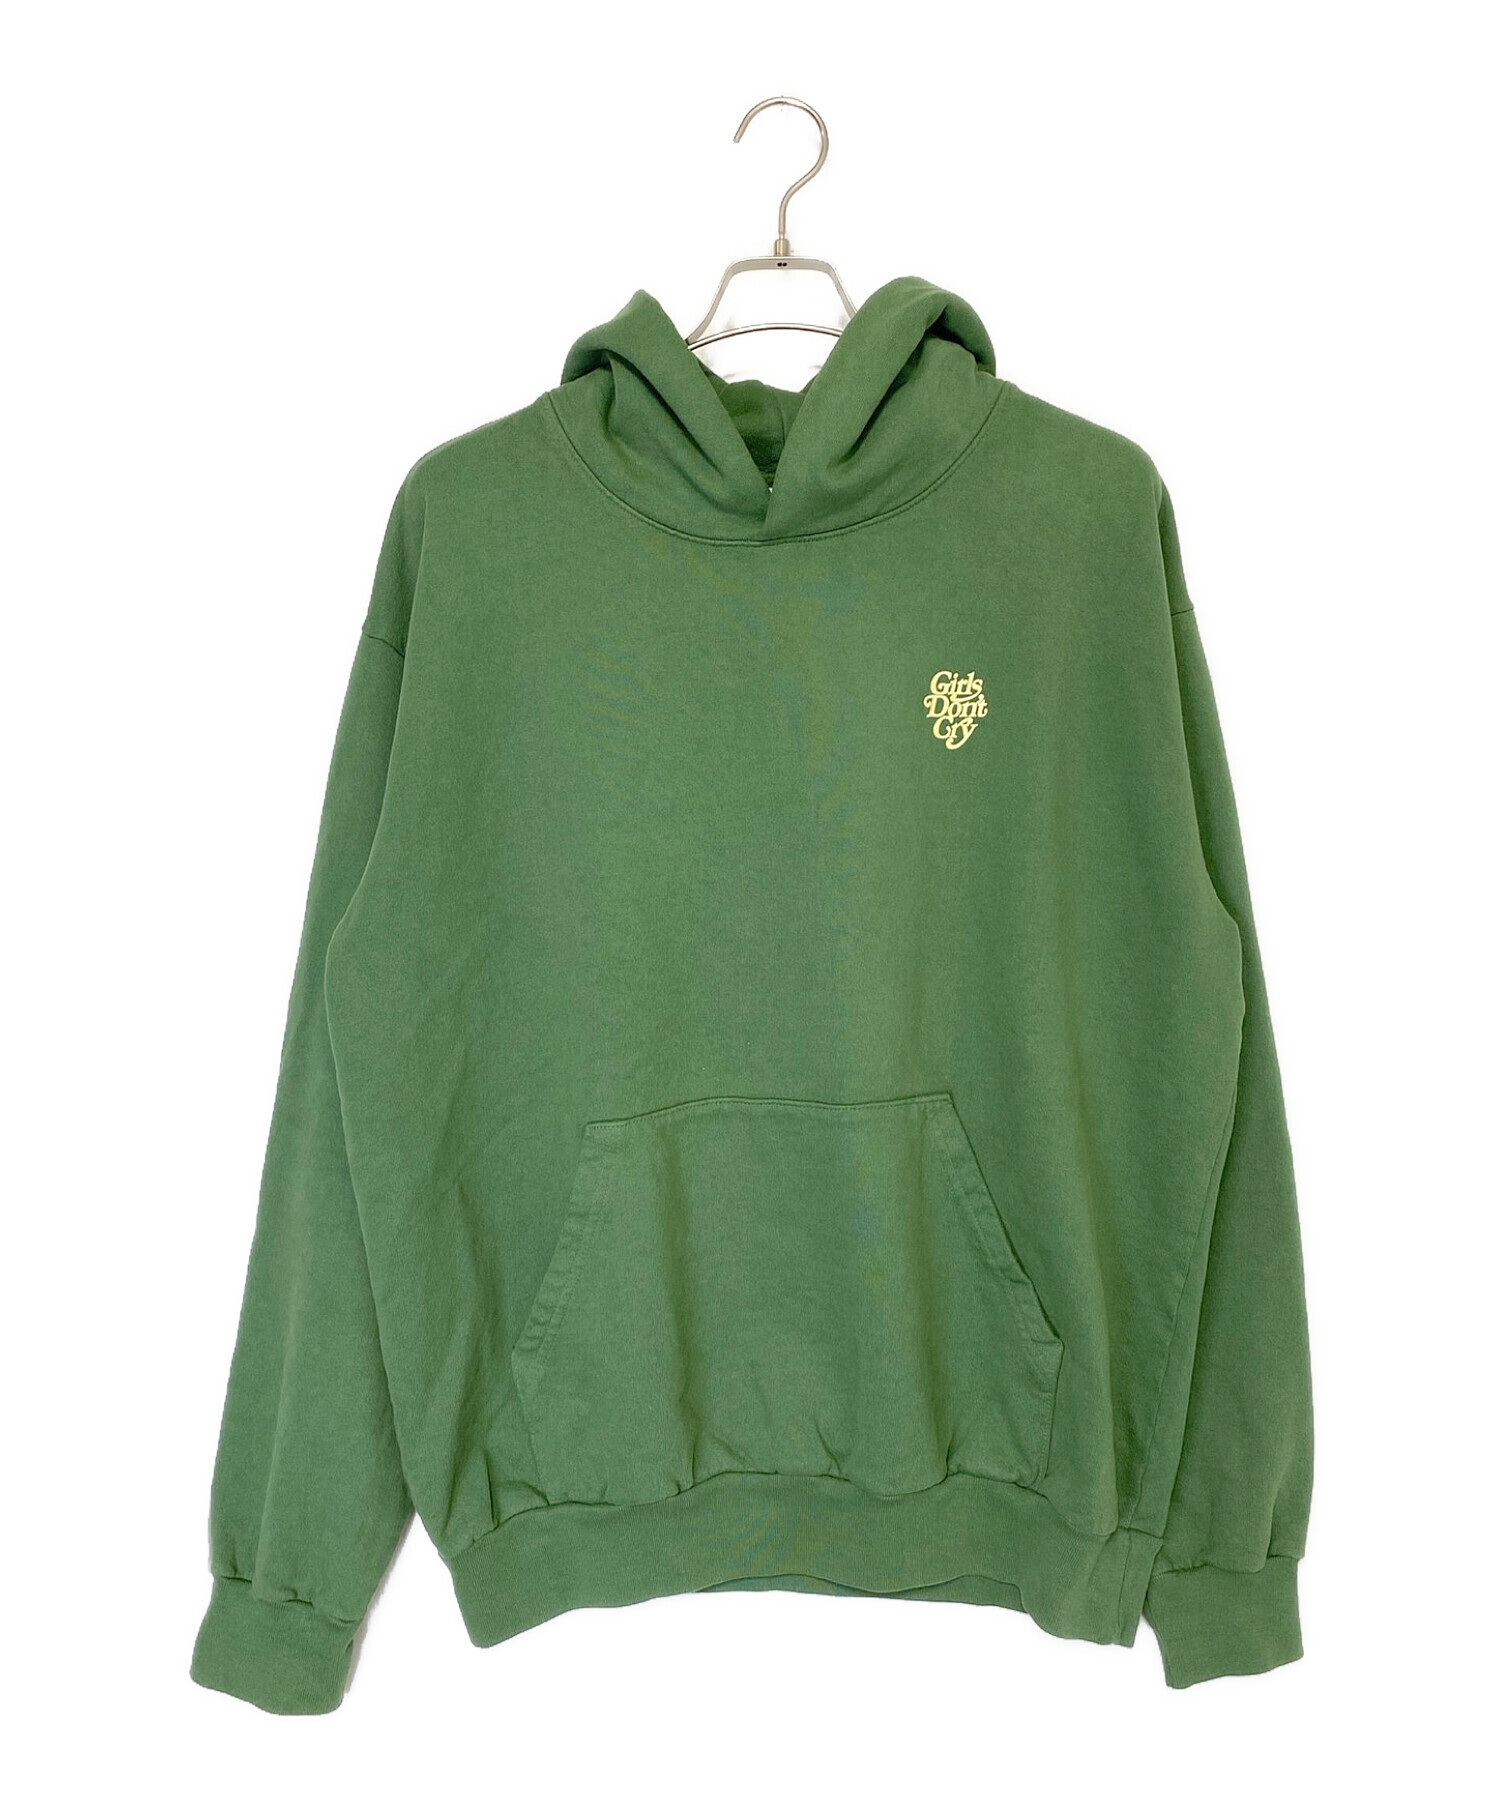 Girls don’t cry hoodie パーカー　緑